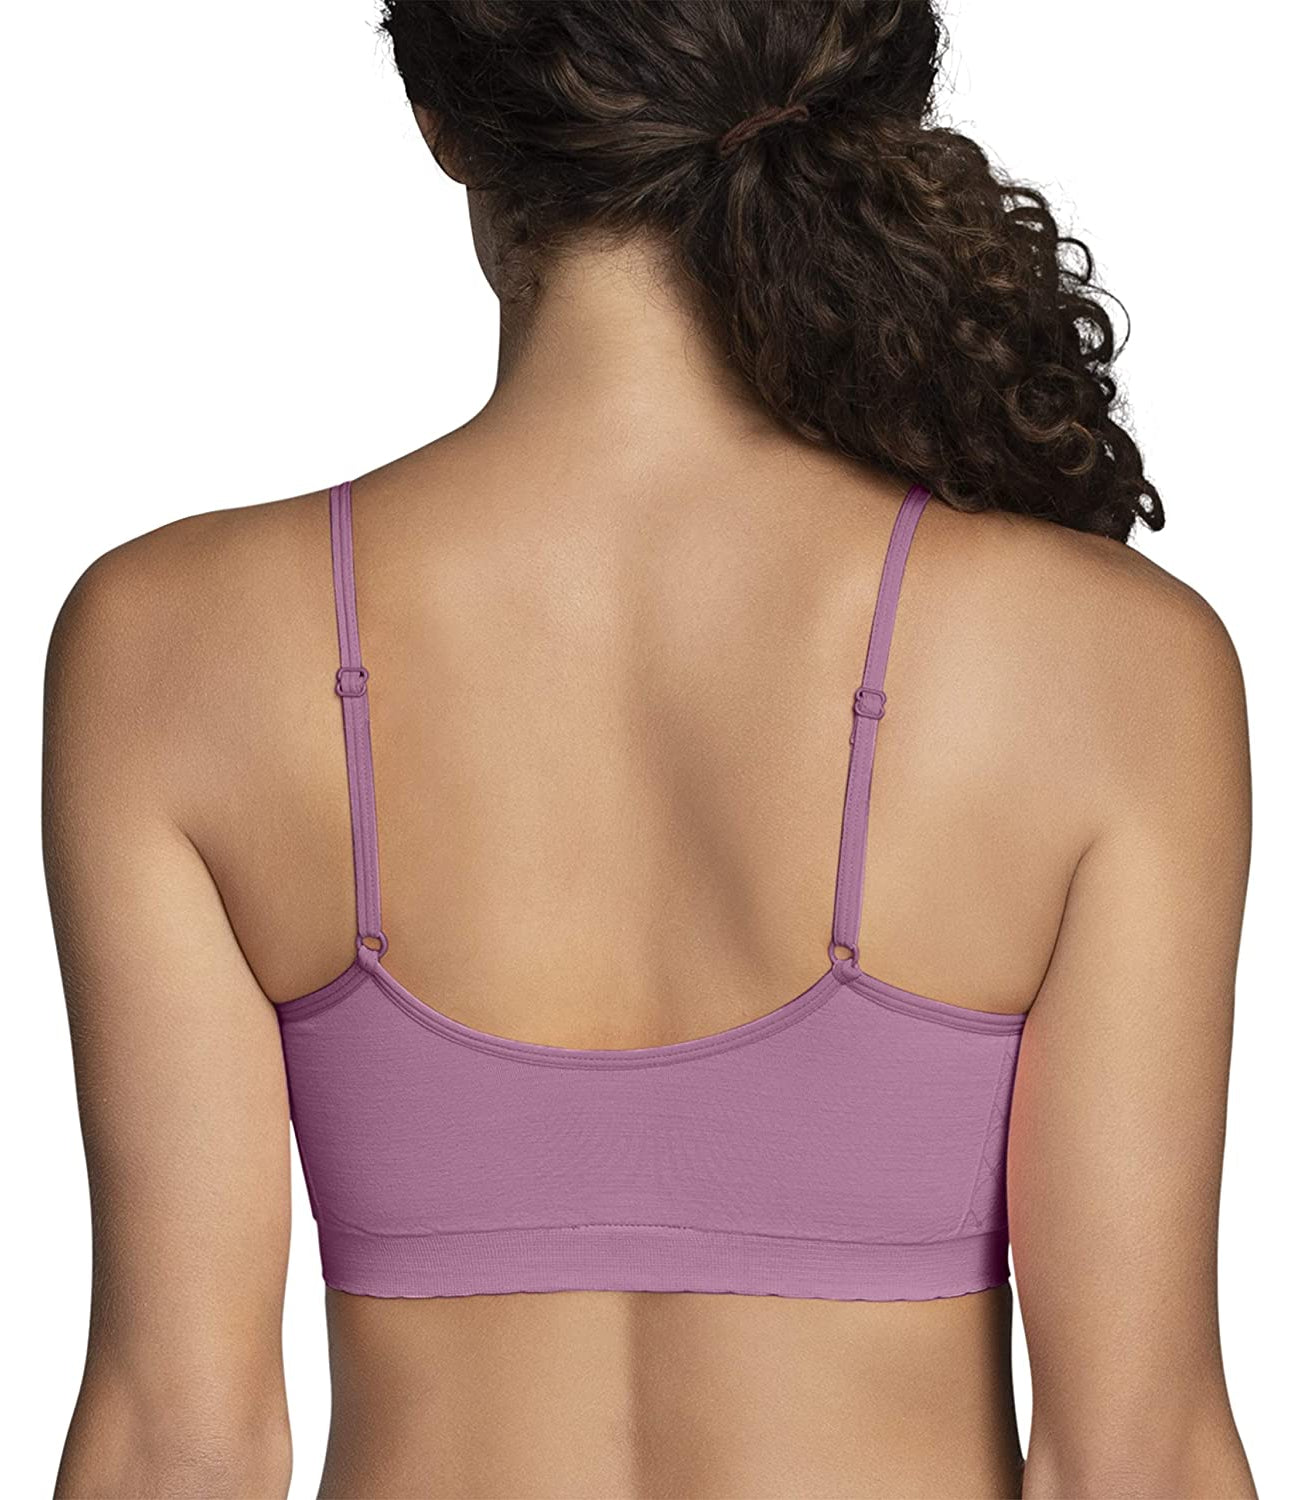 Lily of France sports bra in size:S